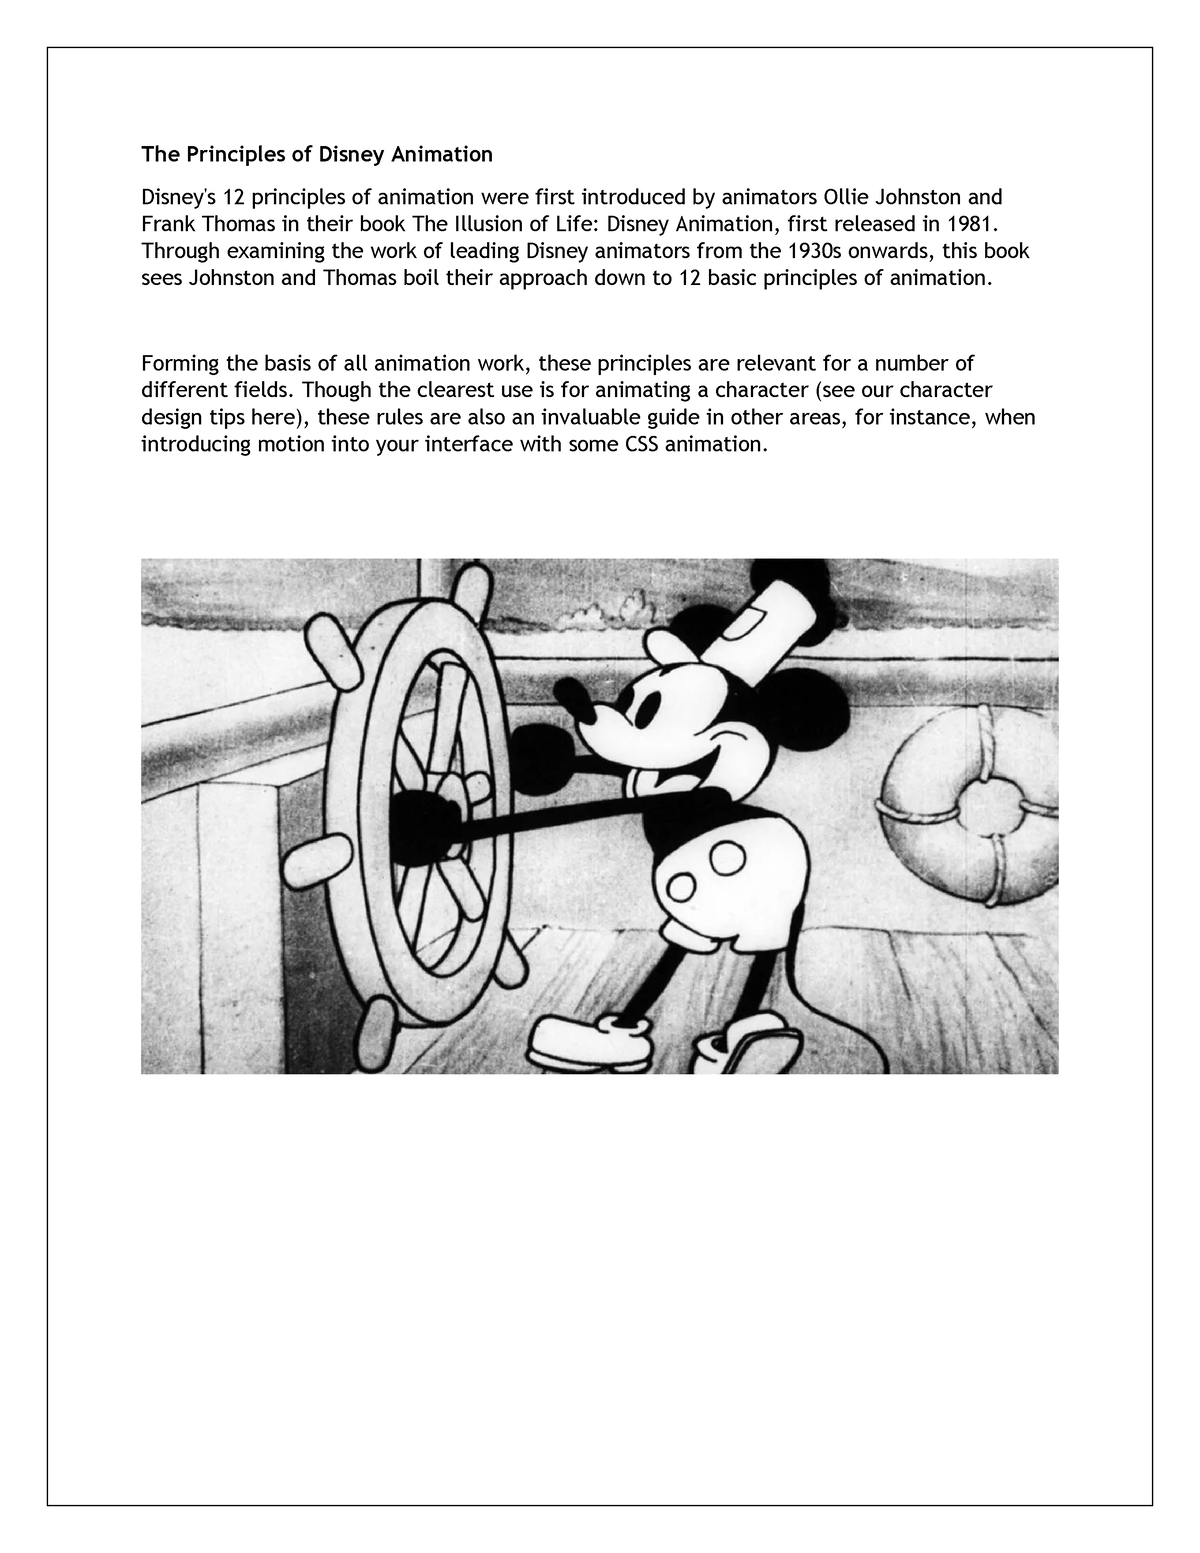 The Principles of Disney Animation - The Principles of Disney Animation  Disney's 12 principles of - Studocu